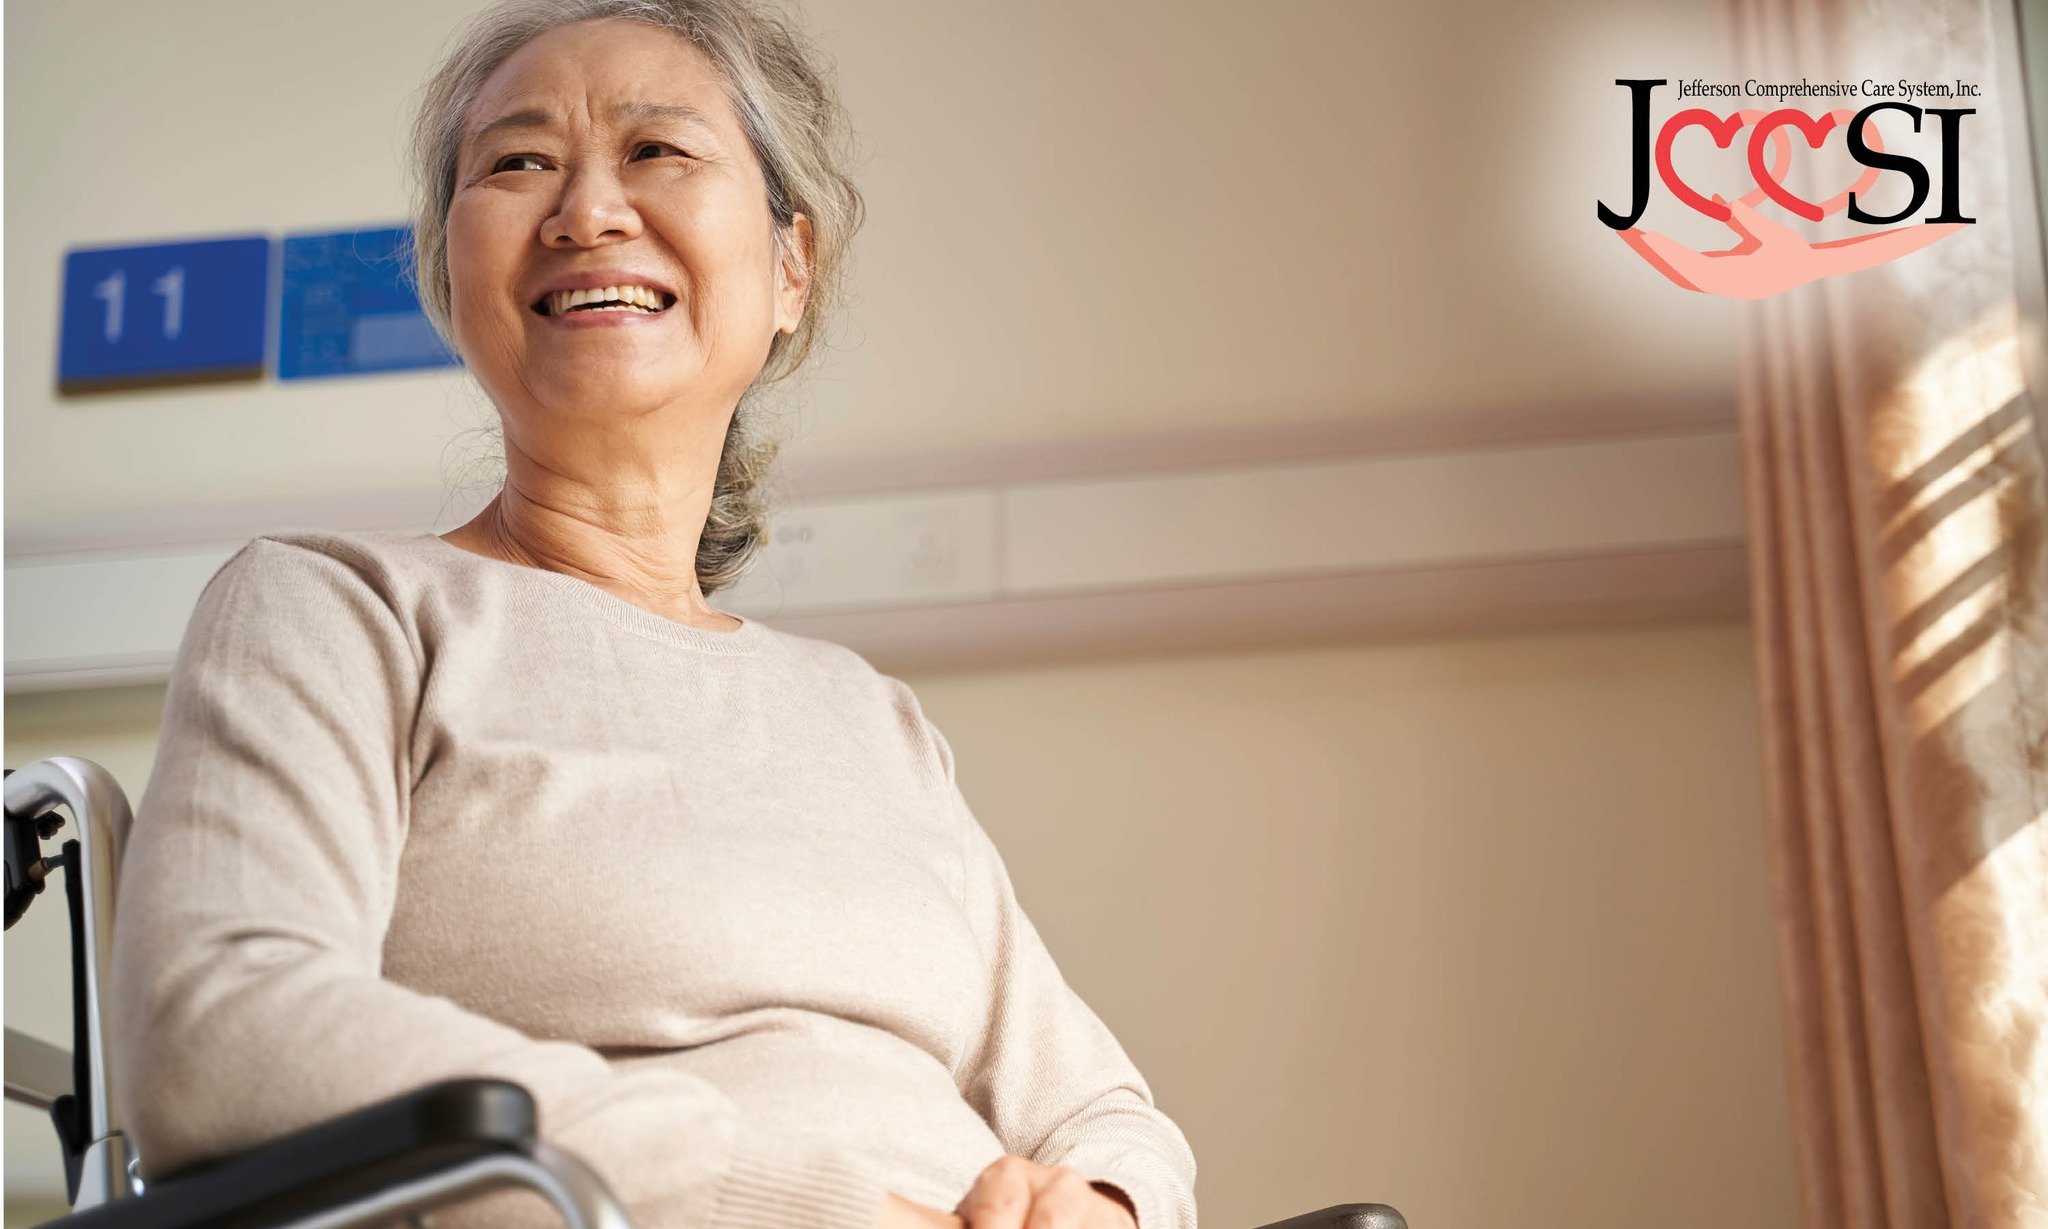 April is Medicaid Awareness Month! Did you know Medicaid helps provide healthcare access to over 65 million Americans? JCCSI is committed to supporting Medicaid beneficiaries. Schedule an appointment to explore your healthcare options. Your health, o